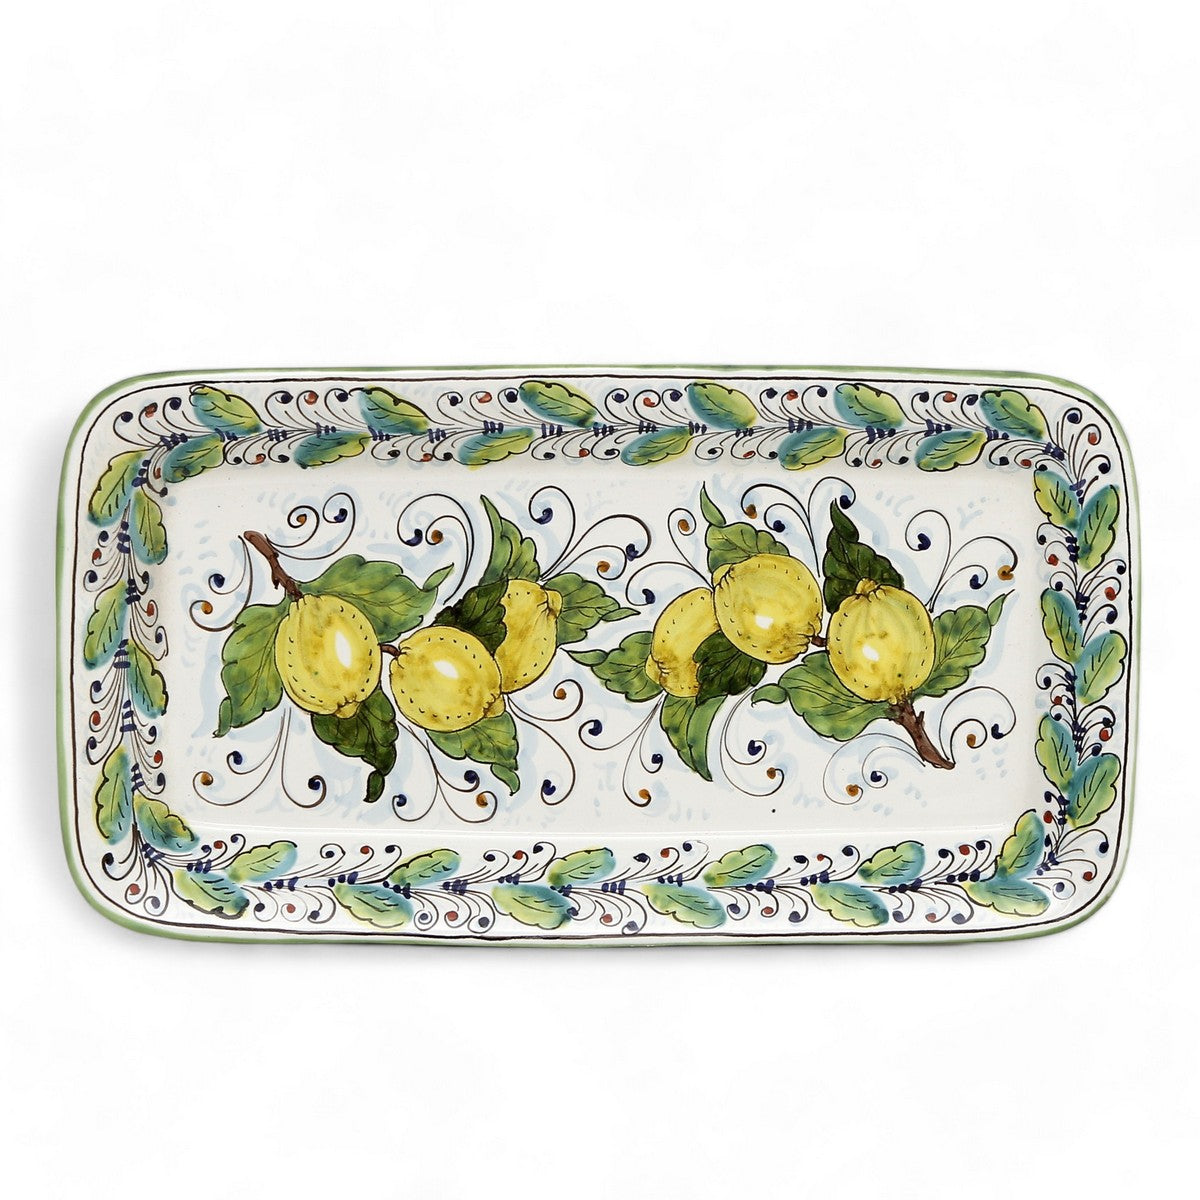 TUSCAN MAJOLICA: Rectangular Tray Platter with a Positano Lemon Design surrounded by green foliage.